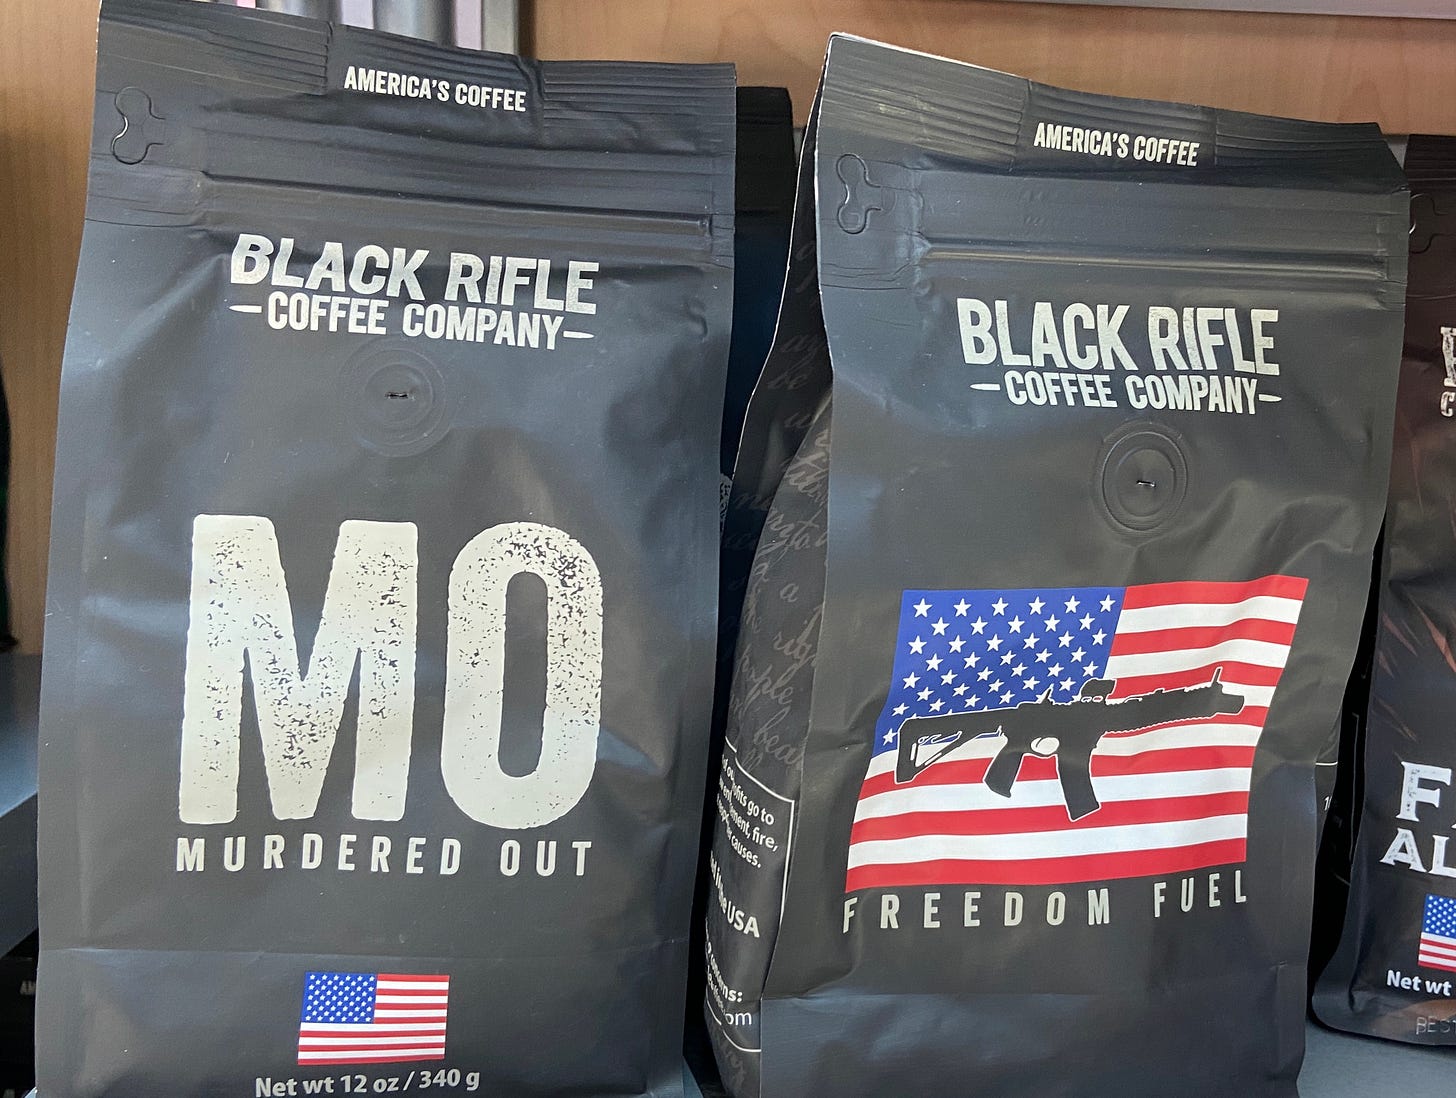 An image of two bags of coffee, one named "Murdered Out" and the other "Freedom Fuel." Images of the american flag and assault weapons are shown on the bag design.